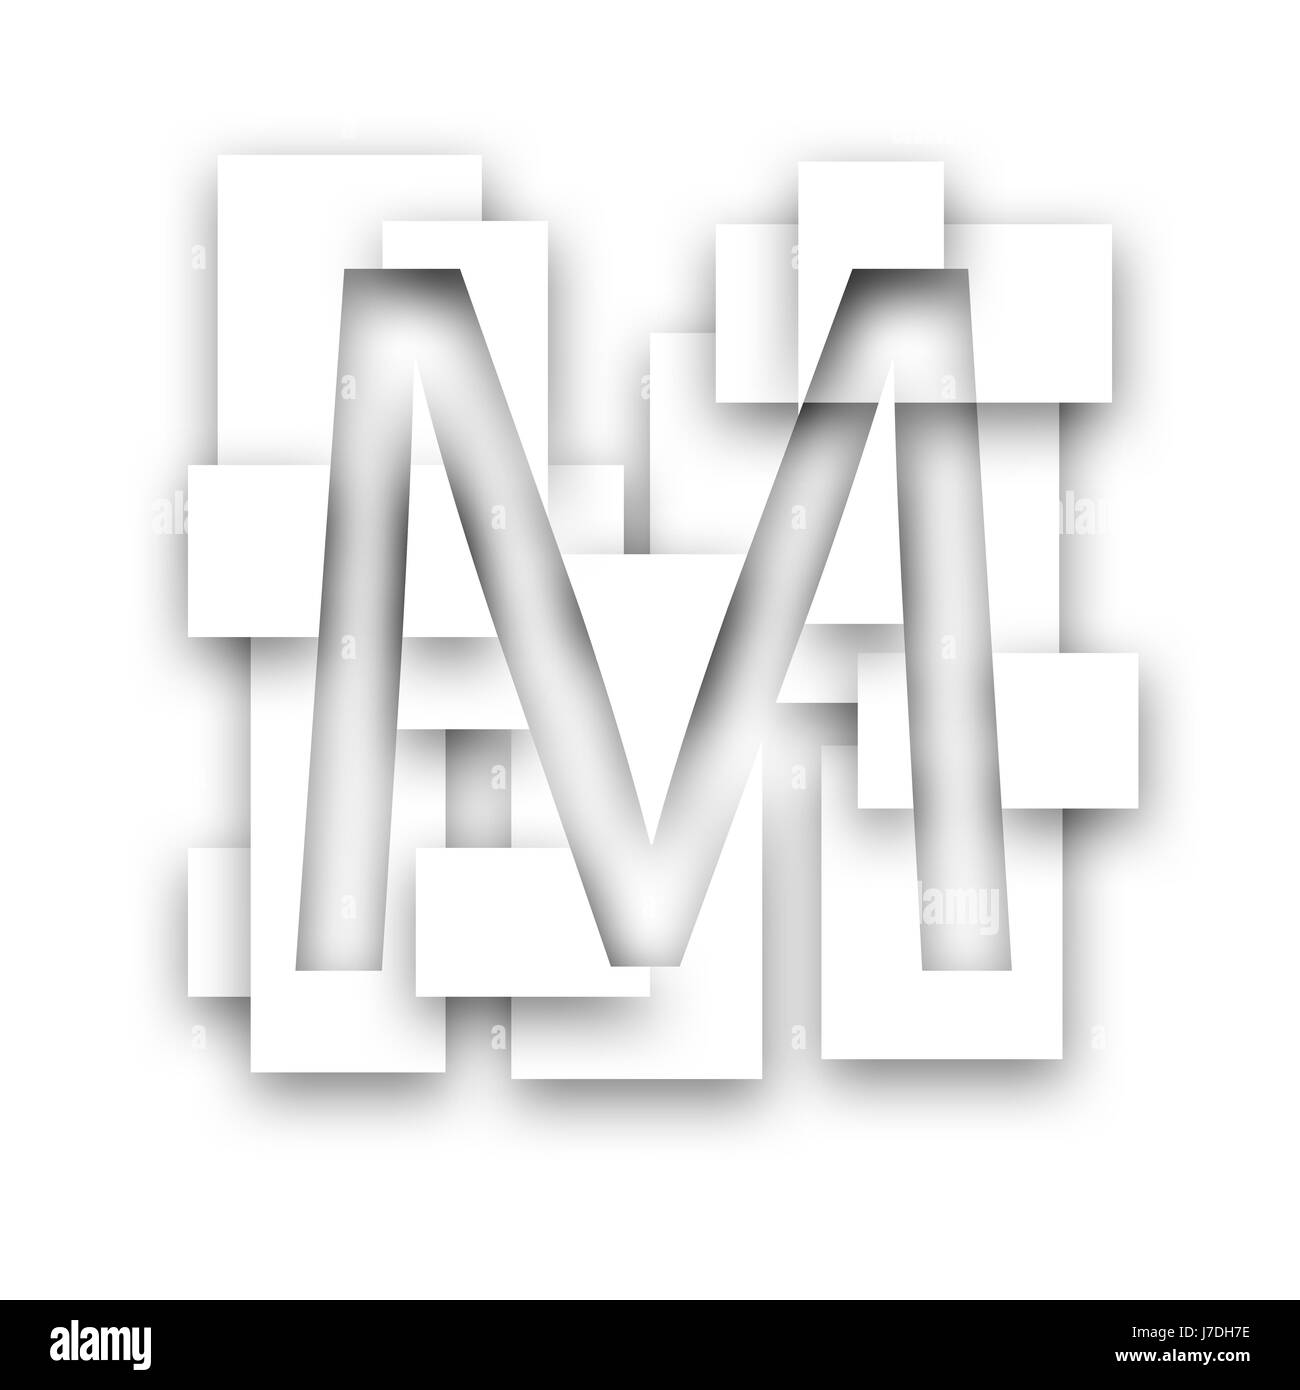 M letter Black and White Stock Photos & Images - Alamy